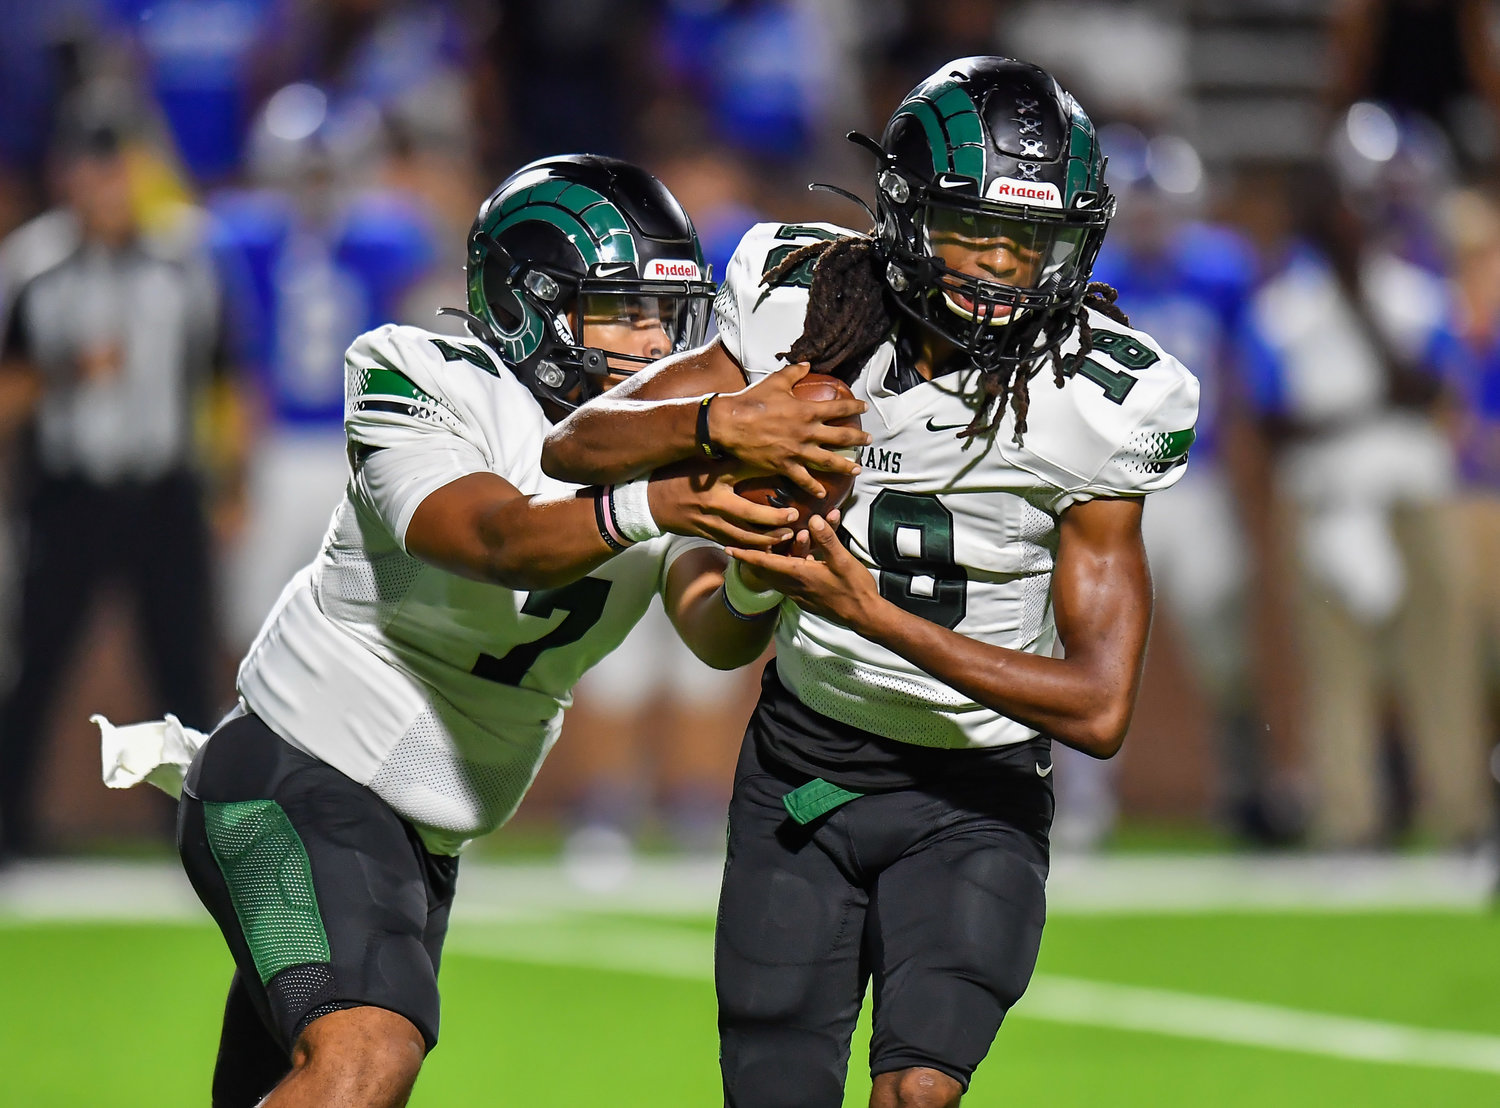 Katy, Tx. Oct 15, 2021: Mayde Creeks Jaylen Bragg #7 hands the ball off to Mayde Creeks Quintin Davis #18 during a conference game between Mayde Creek and Katy Taylor at Rhodes Stadium. (Photo by Mark Goodman / Katy Times)